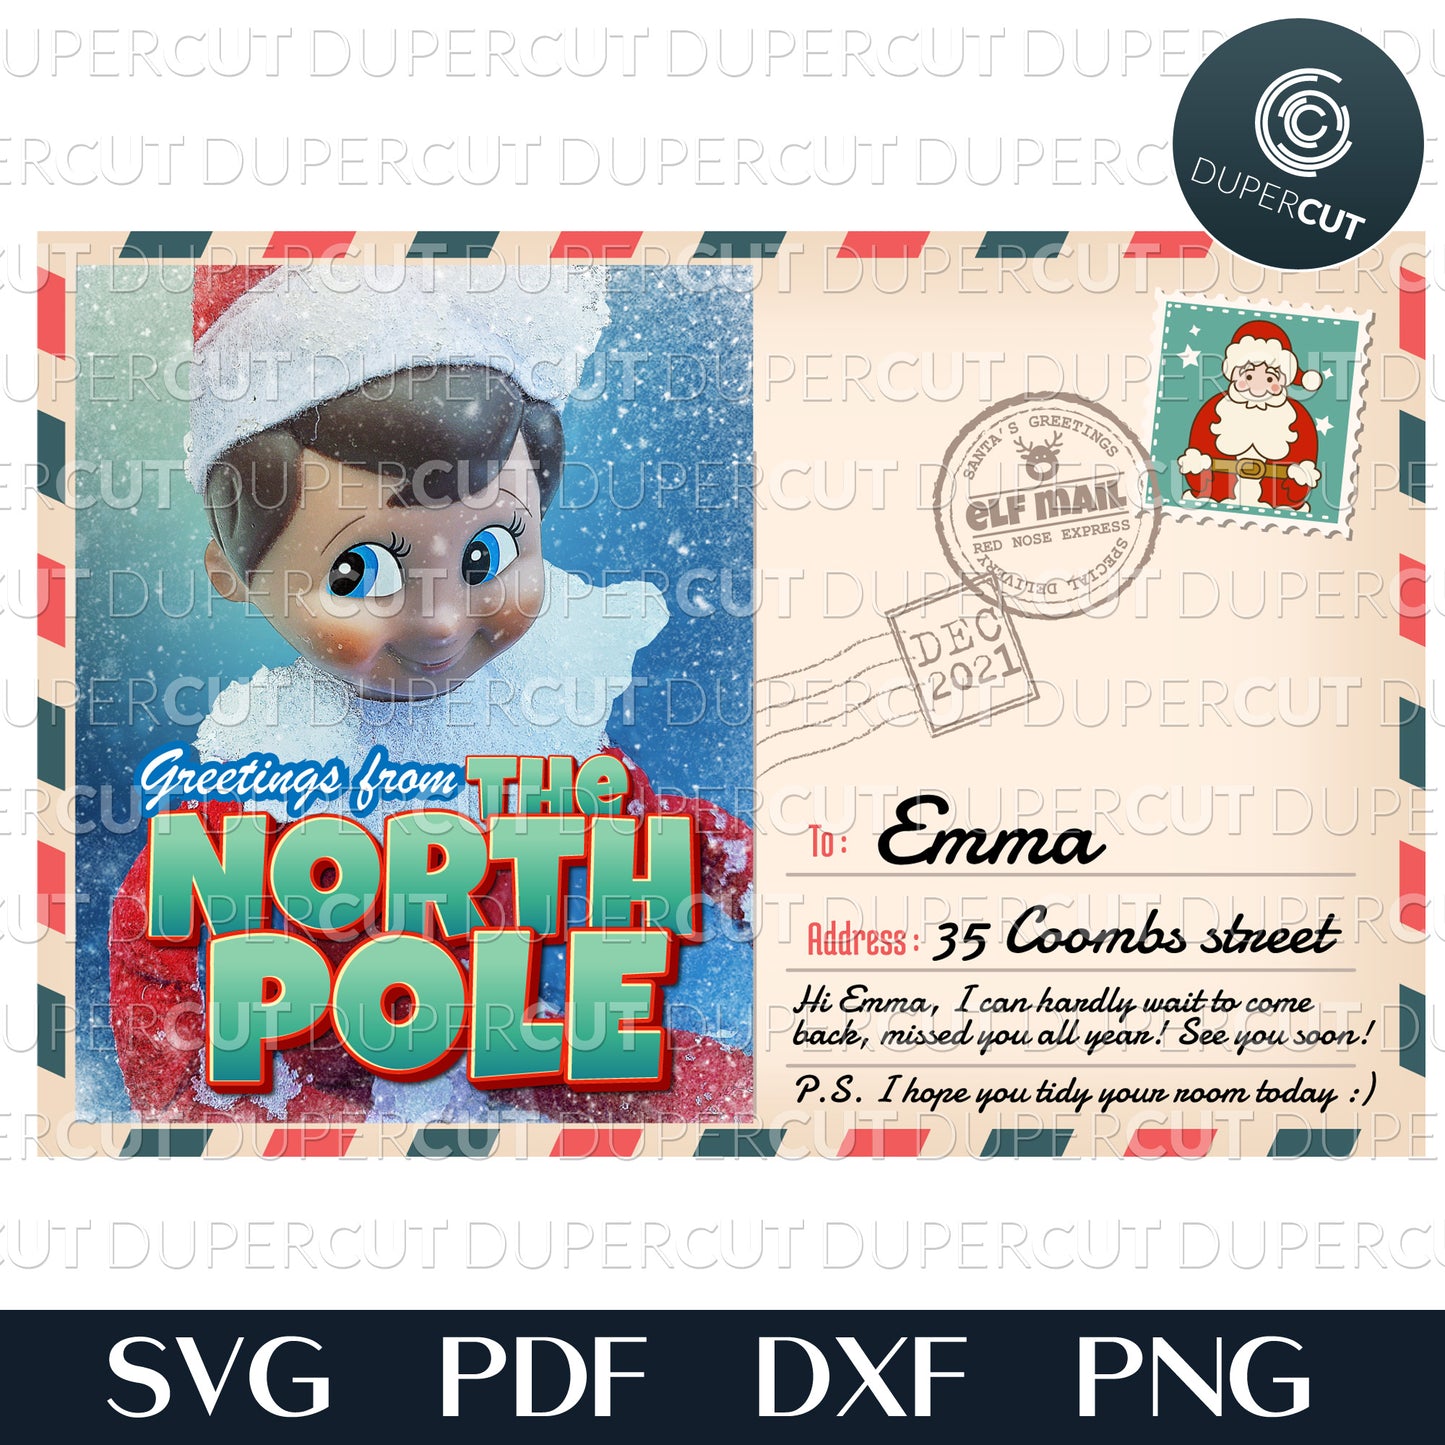 Elf on the shelf pre-arrival postcard - add custom text - greetings from the north pole. Printable files for sublimation or print.